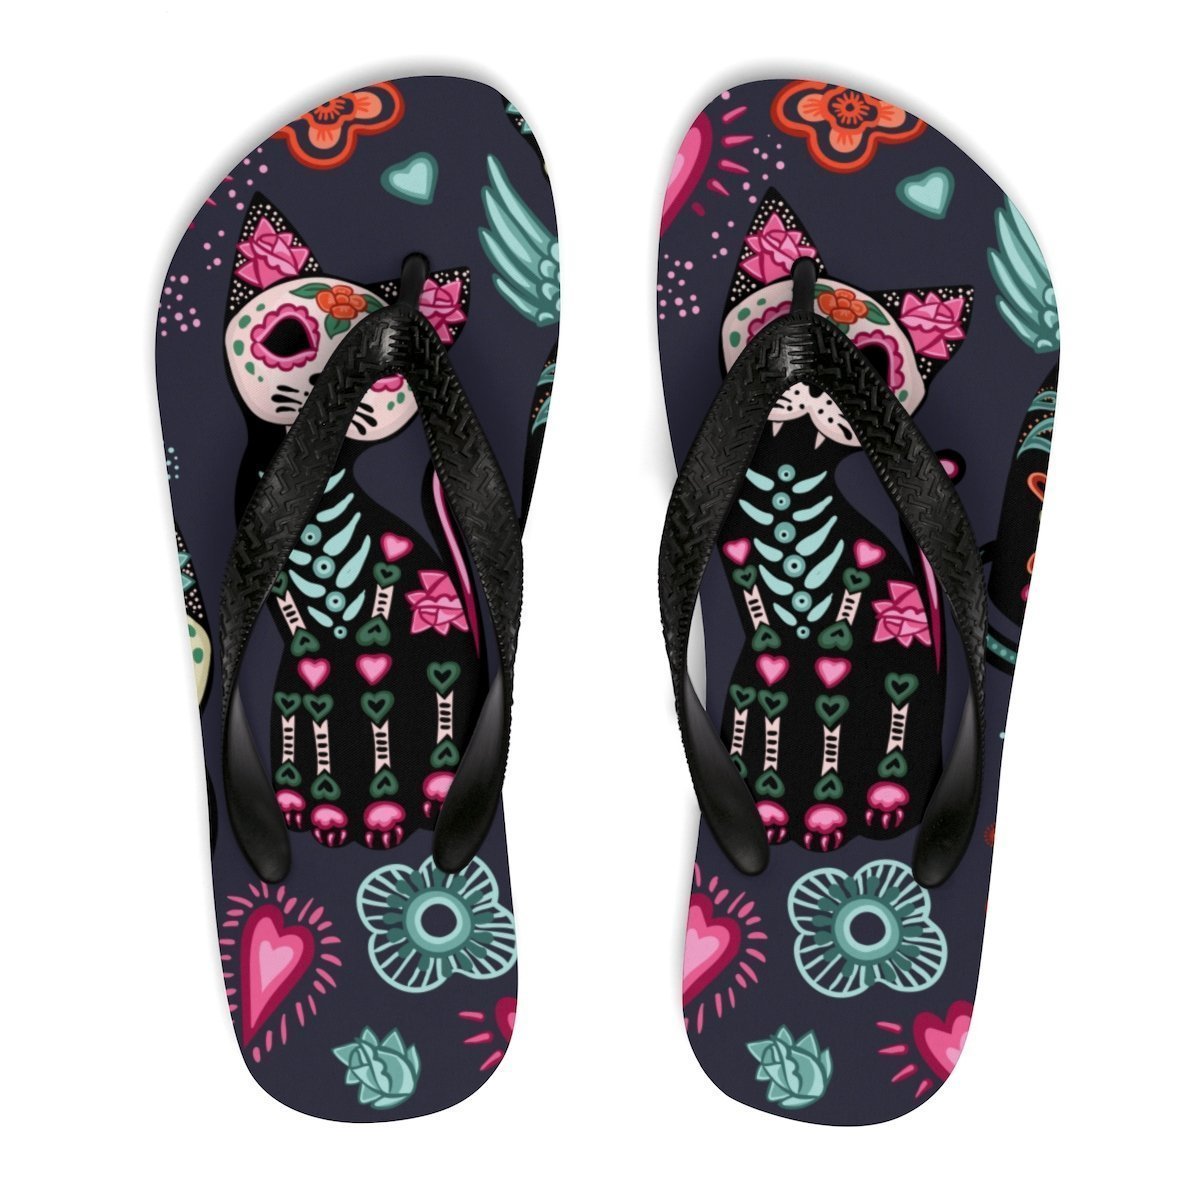 Women's Cat Shoes, Cute Cat Flip Flops Featuring Skeleton Cats Hearts and Flowers